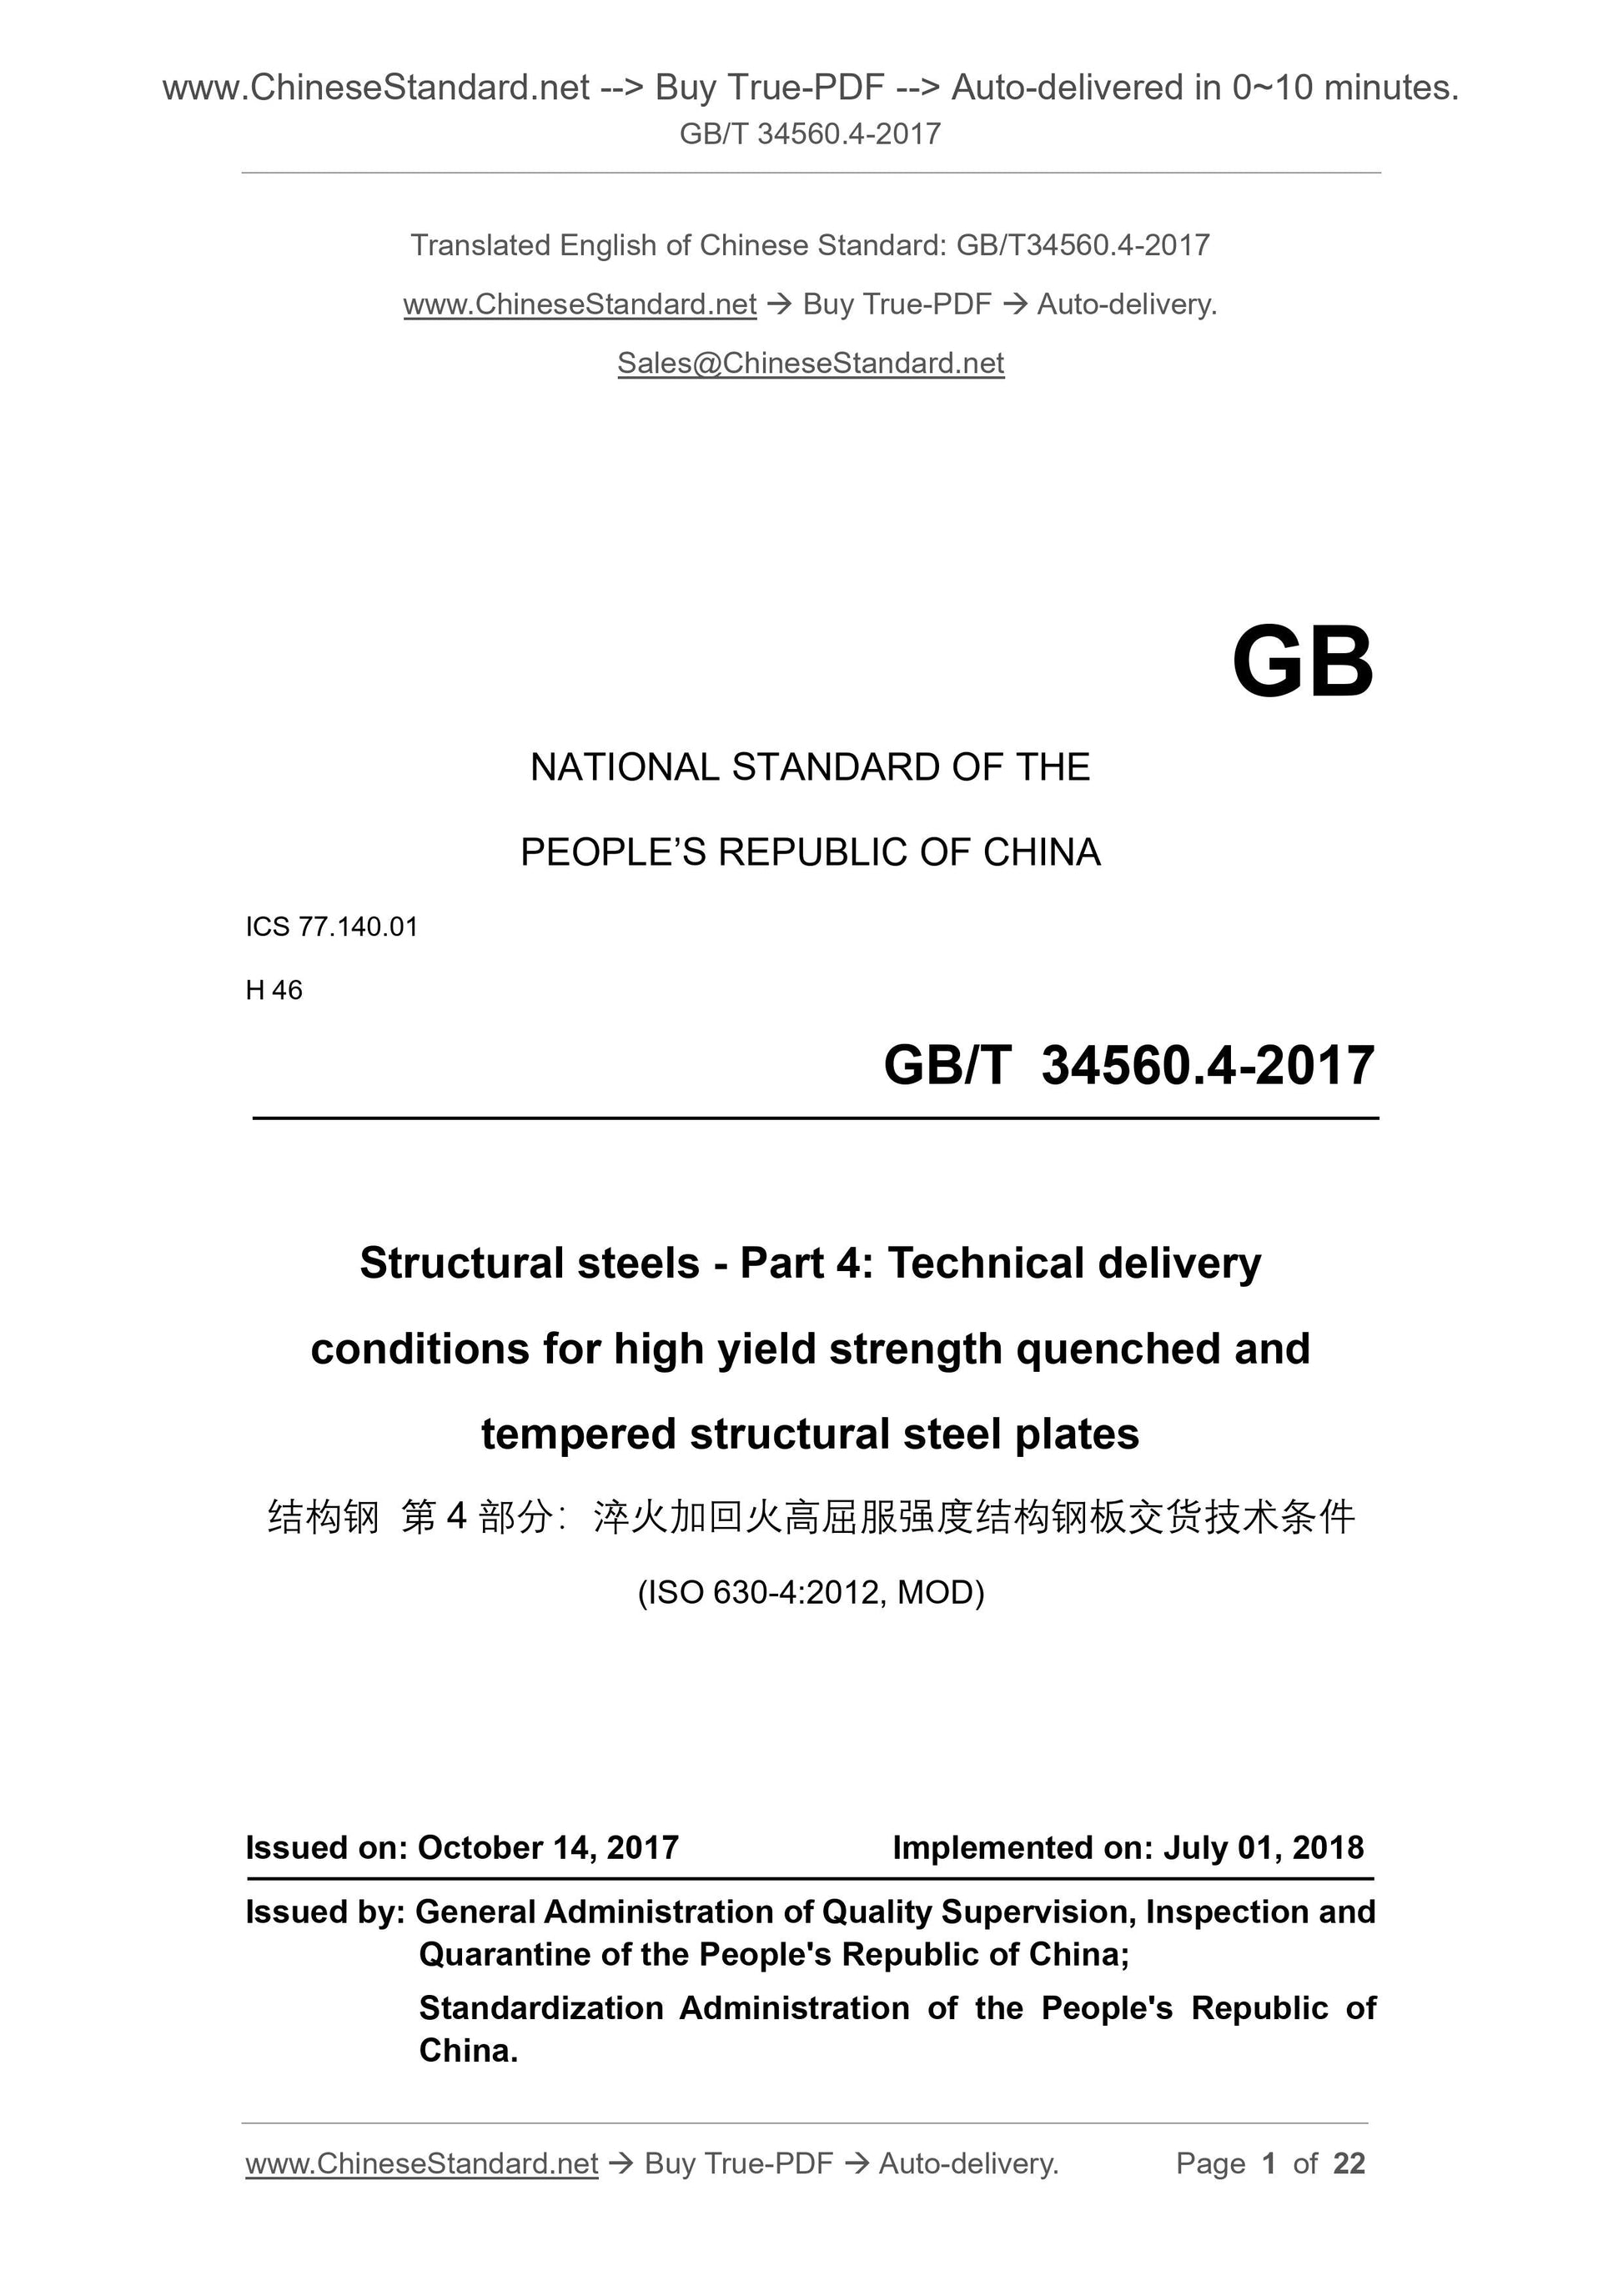 GB/T 34560.4-2017 Page 1